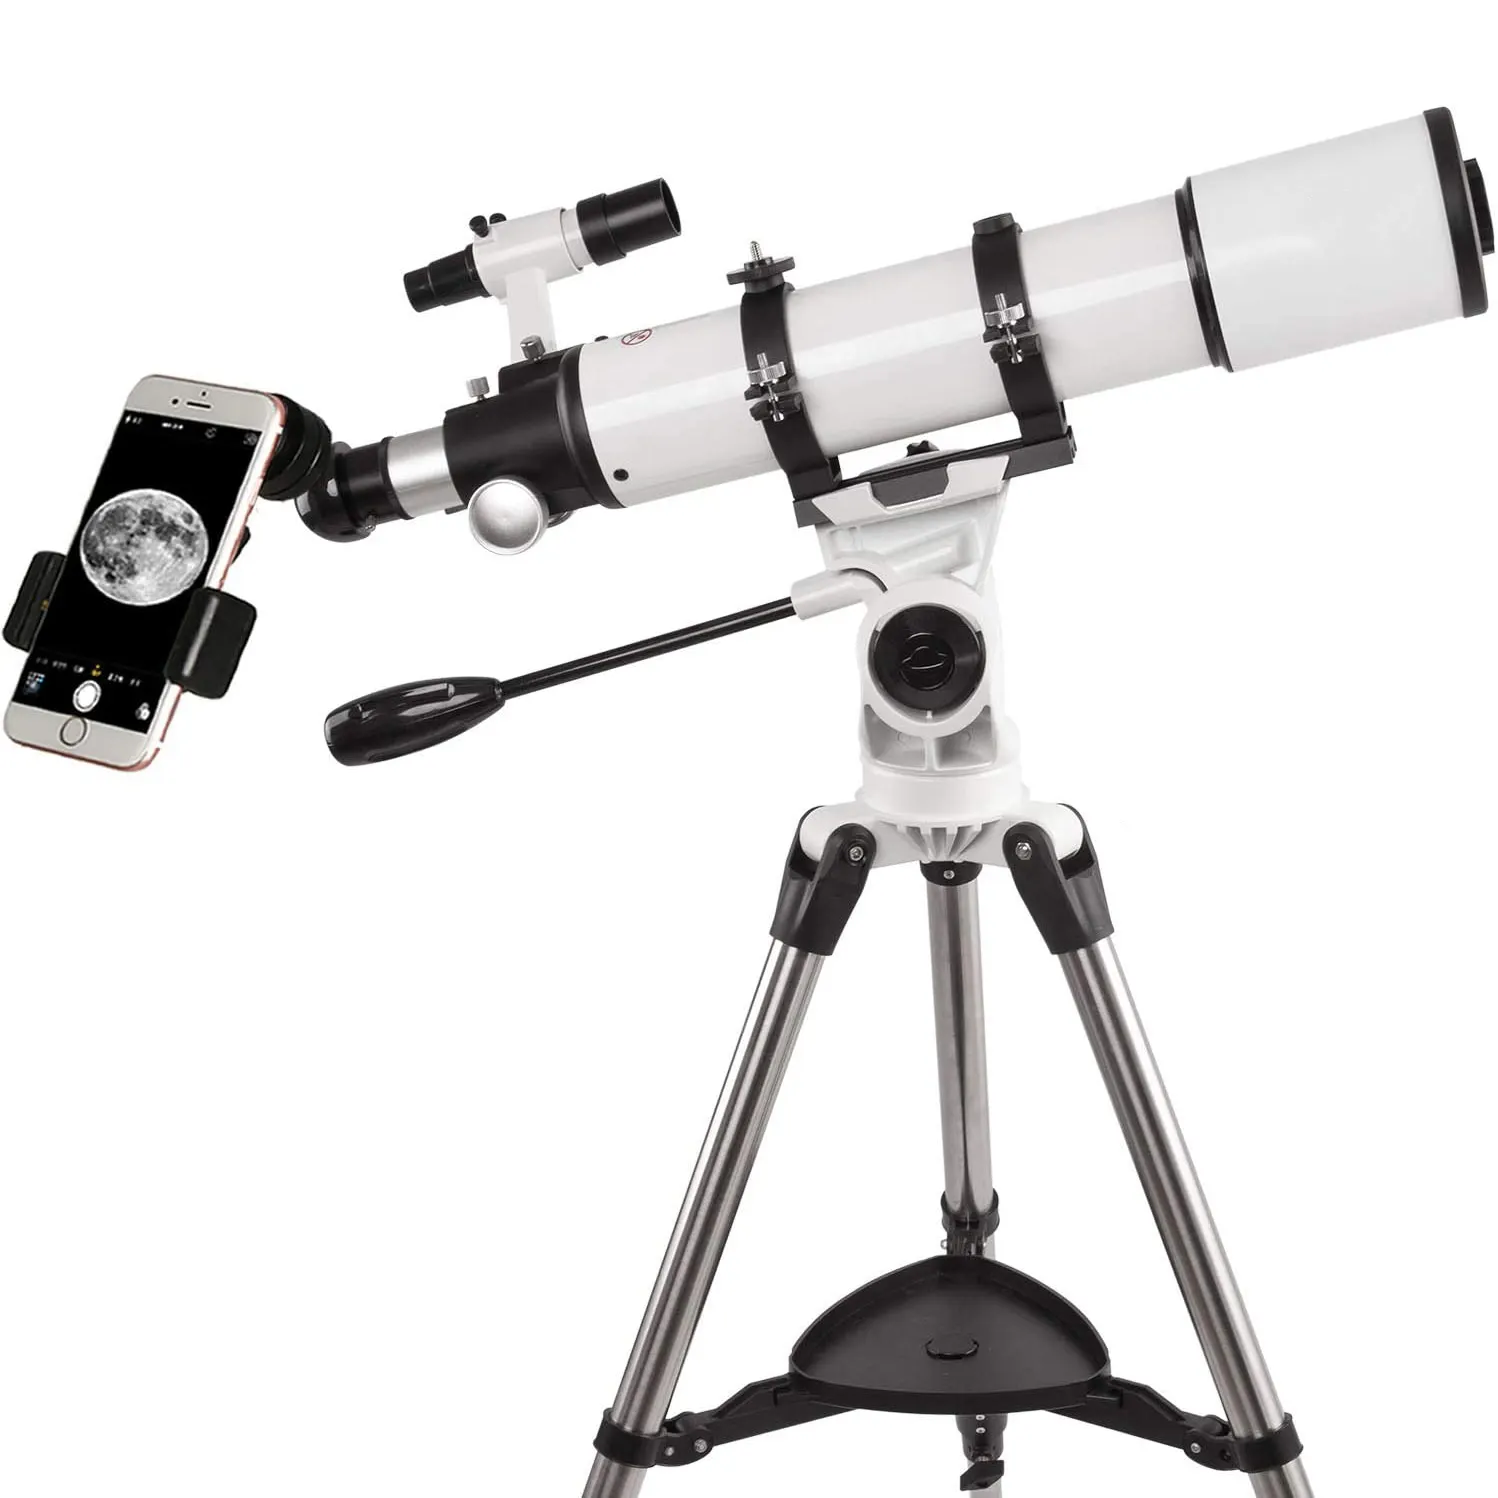 Factory hot sell Astronomical telescope Refractor Type Space telescope with tripod to watching